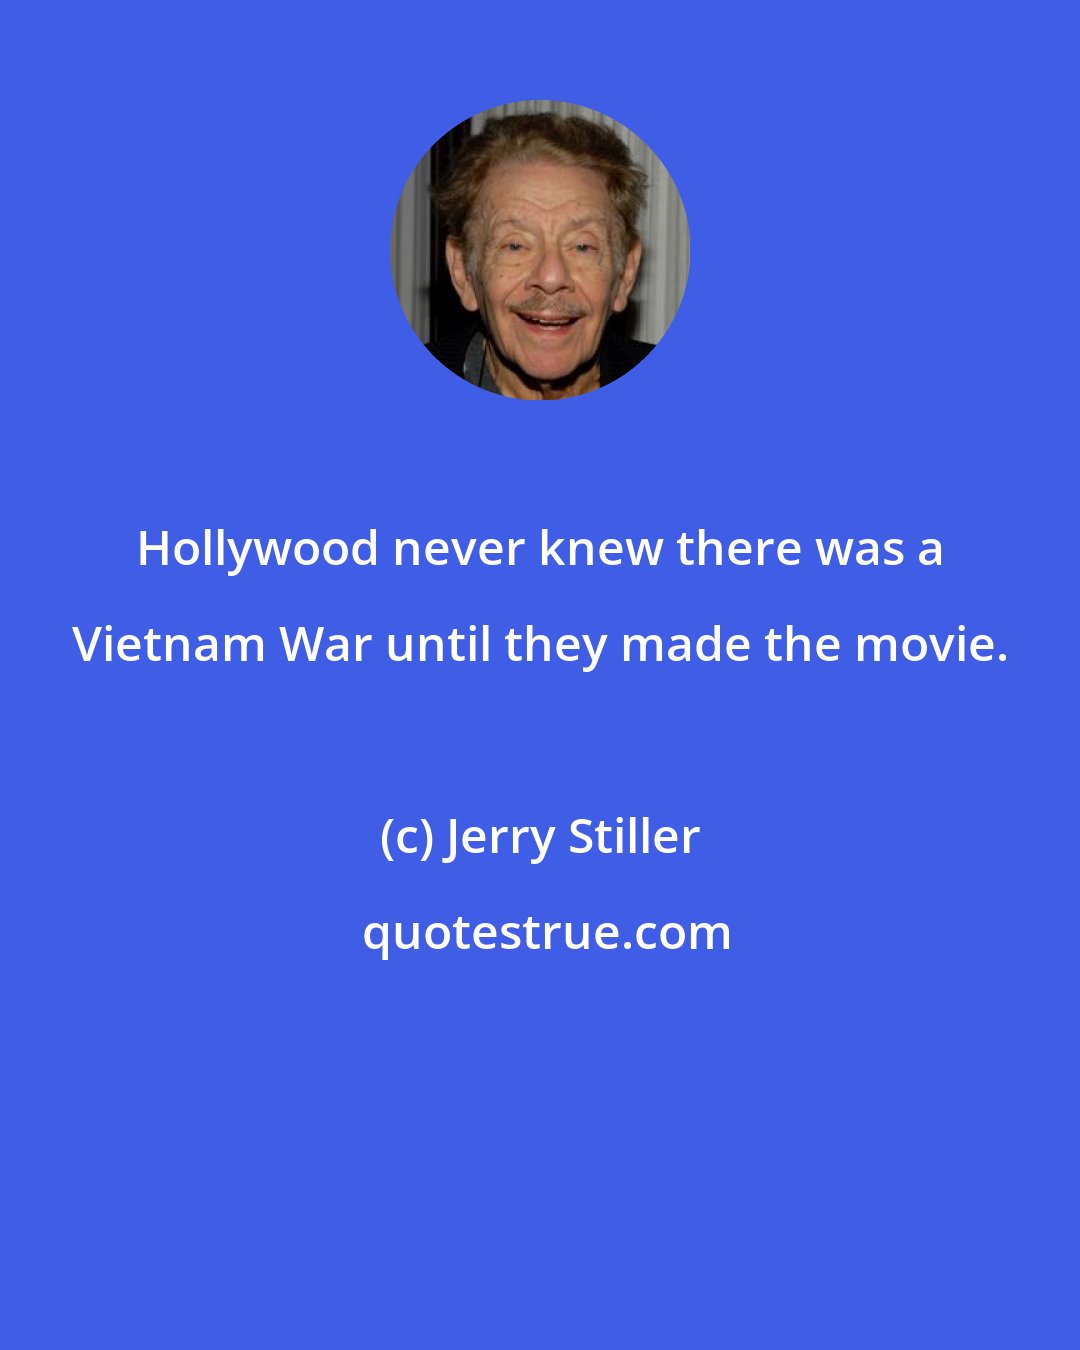 Jerry Stiller: Hollywood never knew there was a Vietnam War until they made the movie.